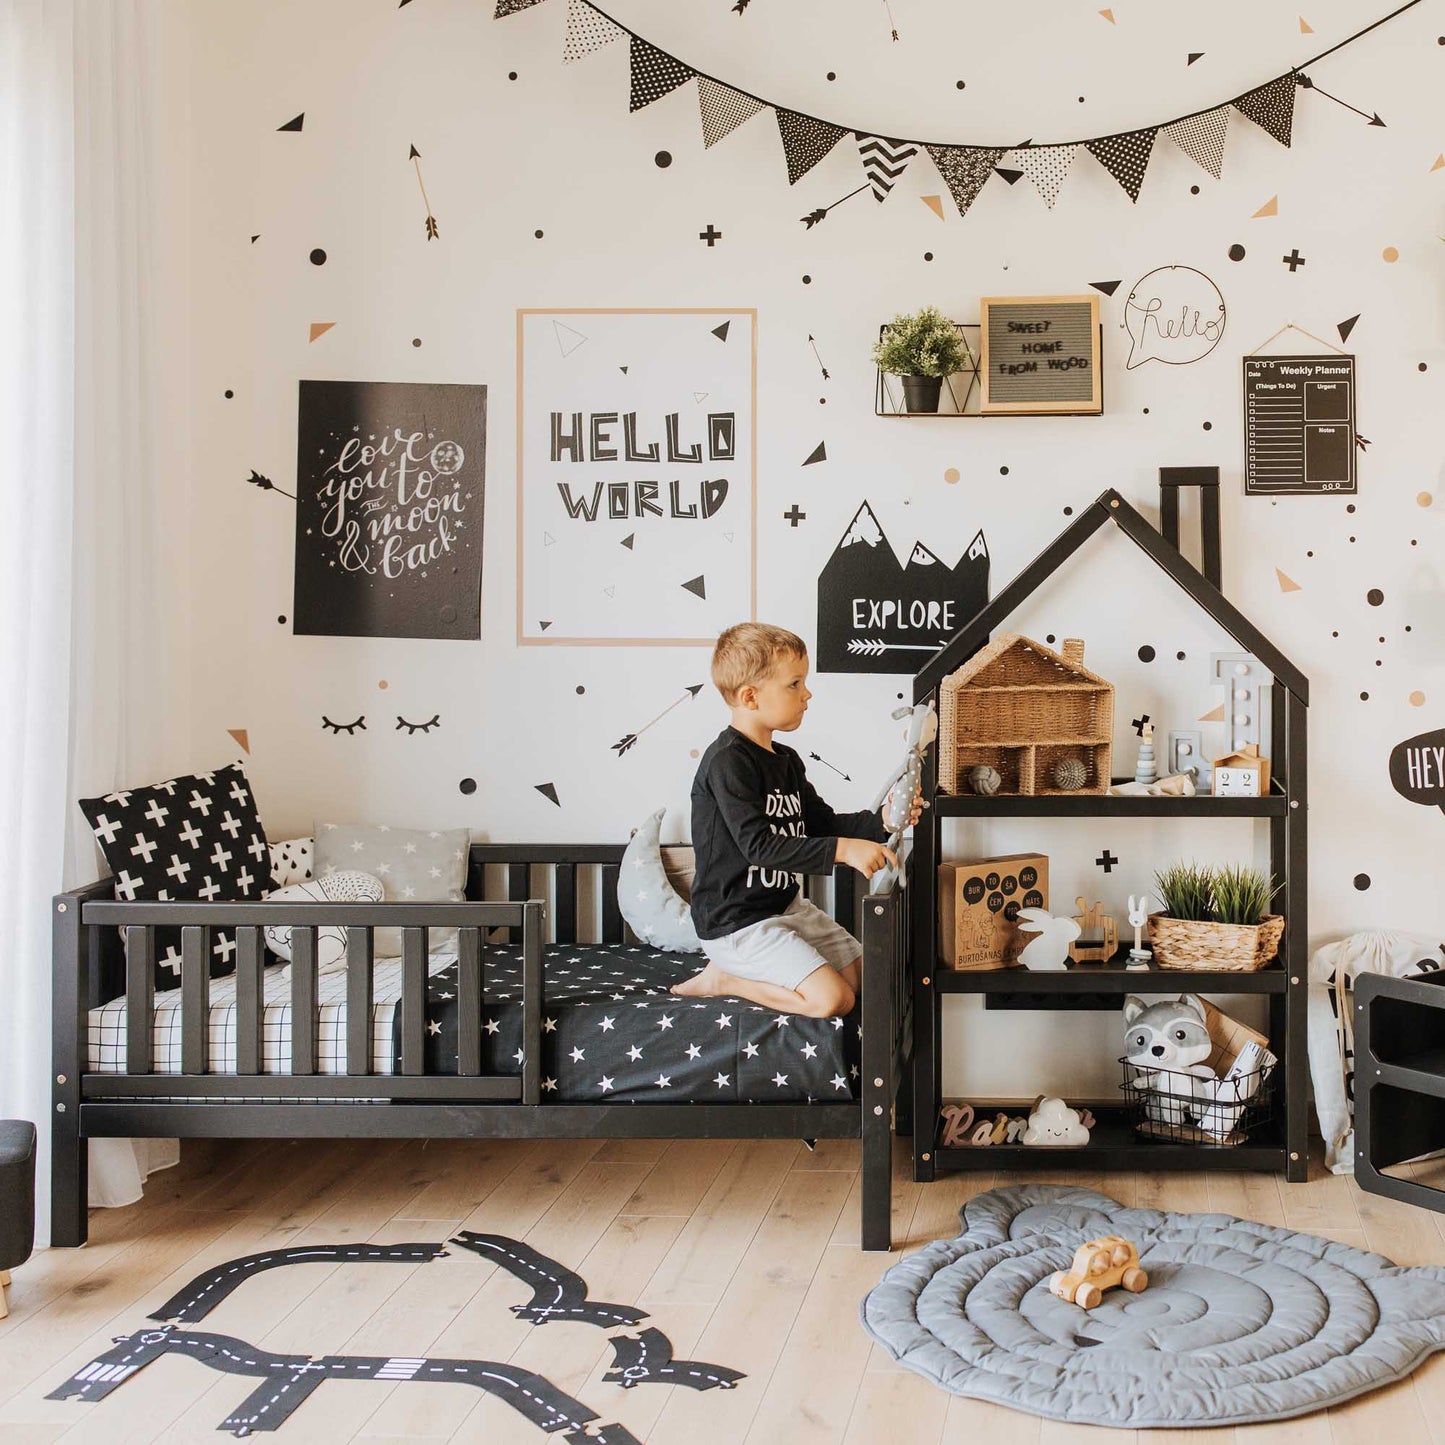 A Sweet Home From Wood black and white boy's room with polka dots featuring a Toddler bed on legs with a fence for co-sleeping.